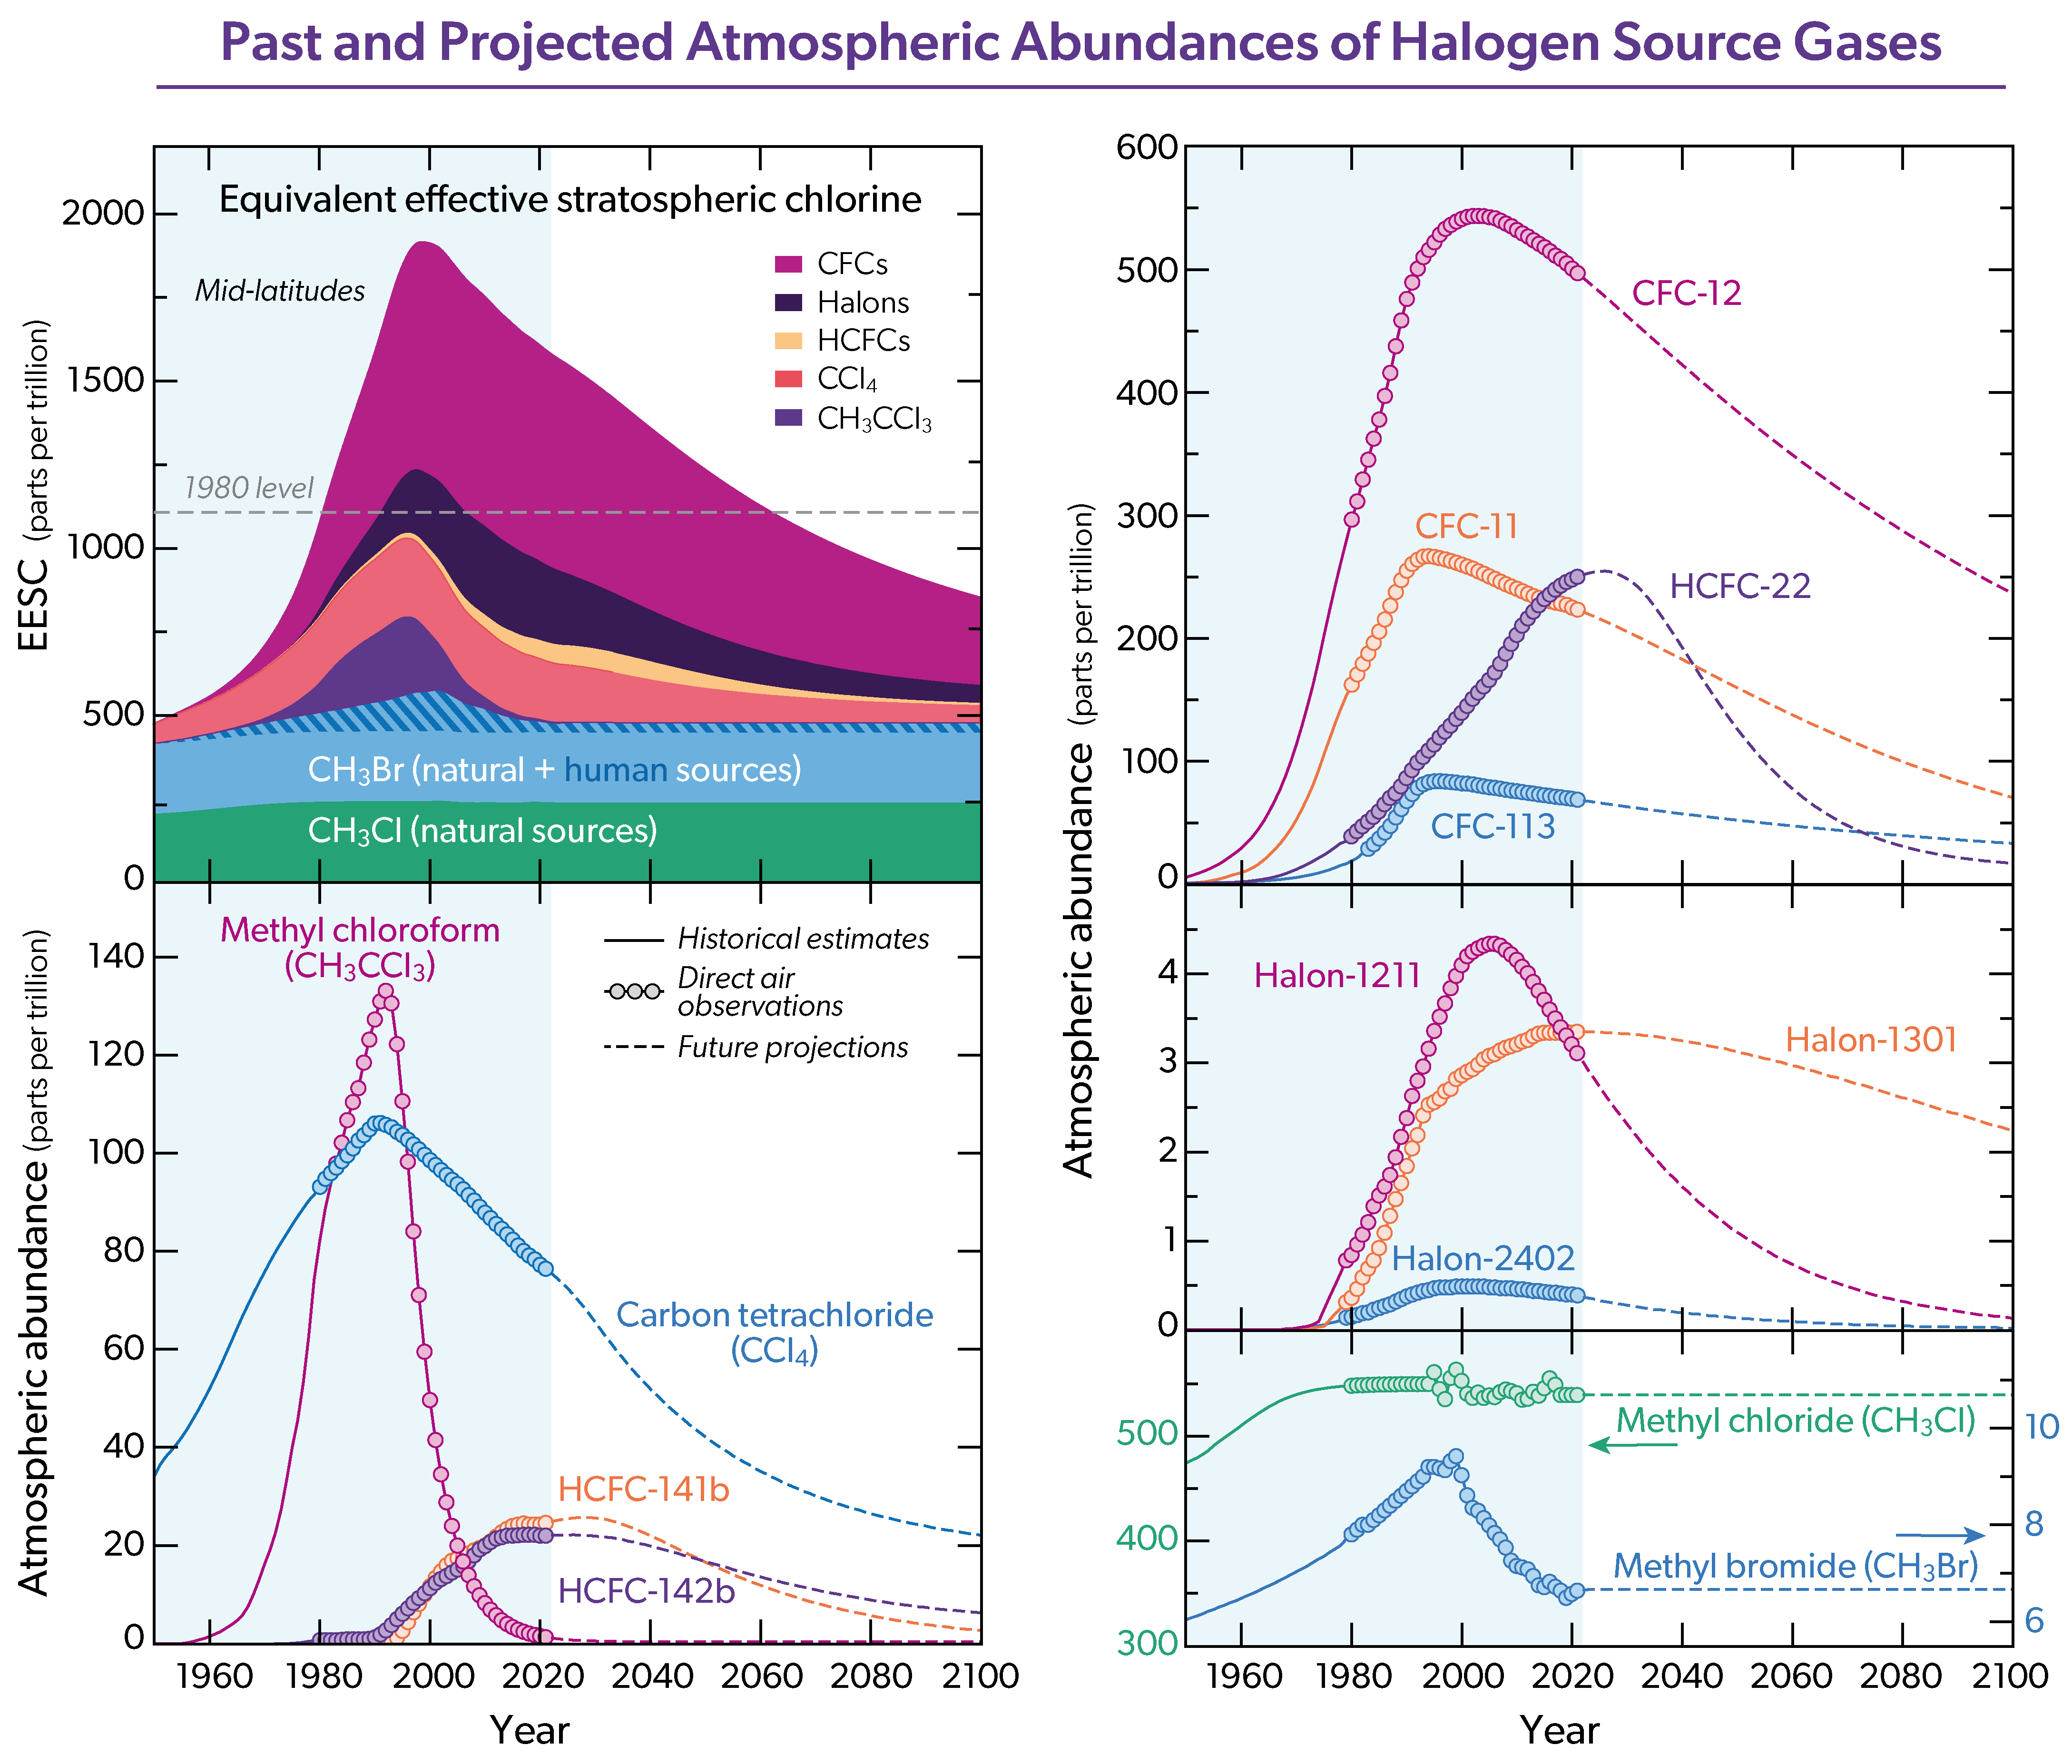 Past and Projected Atmospheric Abundances of Halogen Source Gases